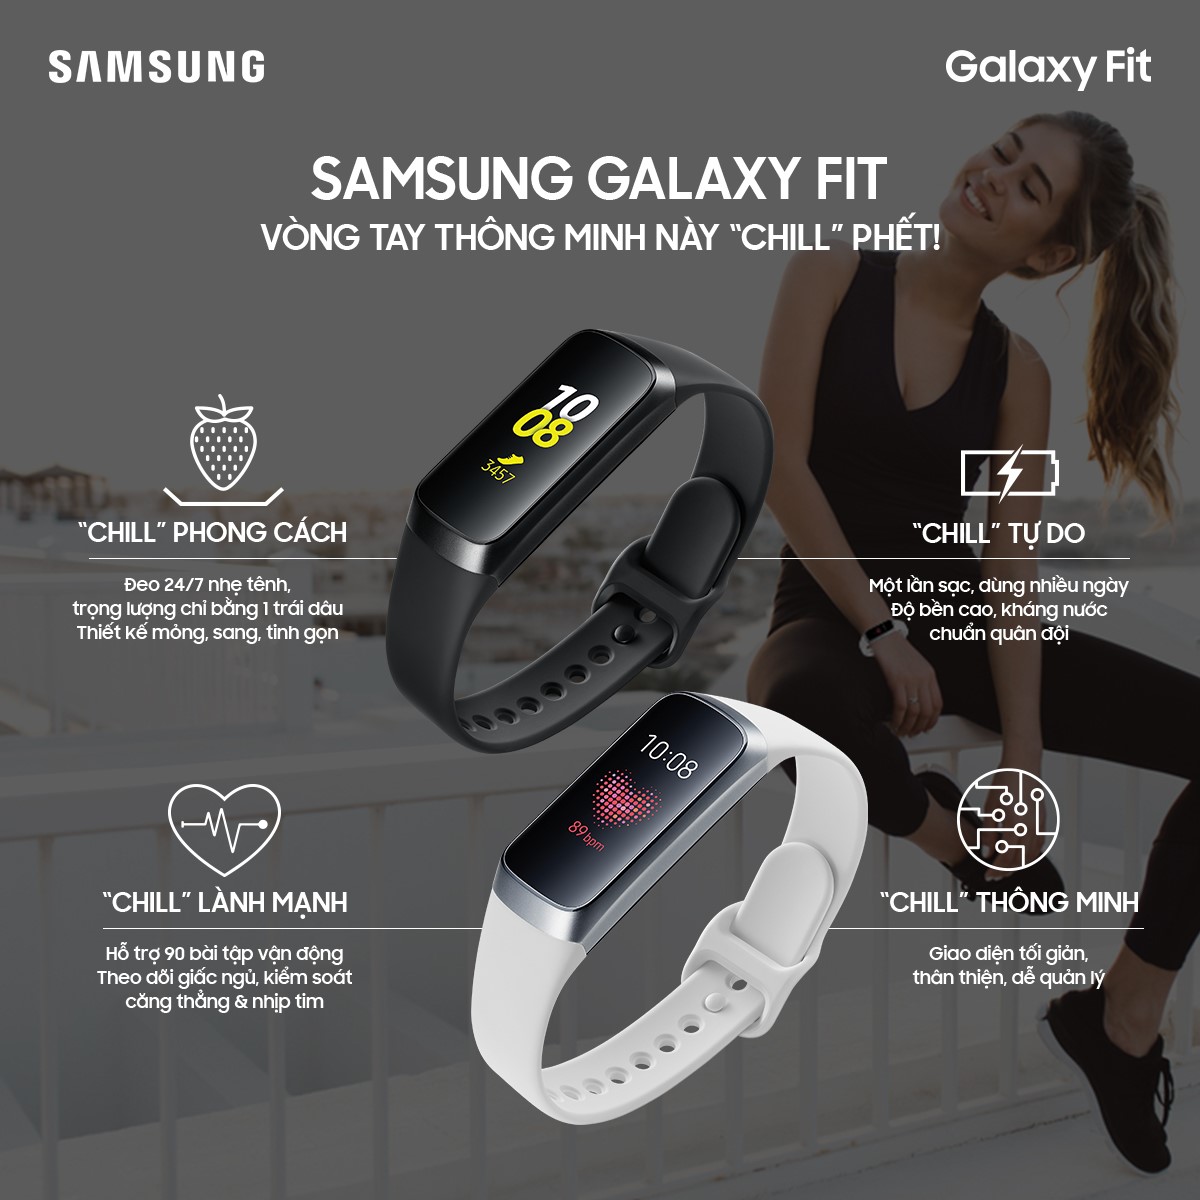 Galaxy-Fit-Infographic.jpg